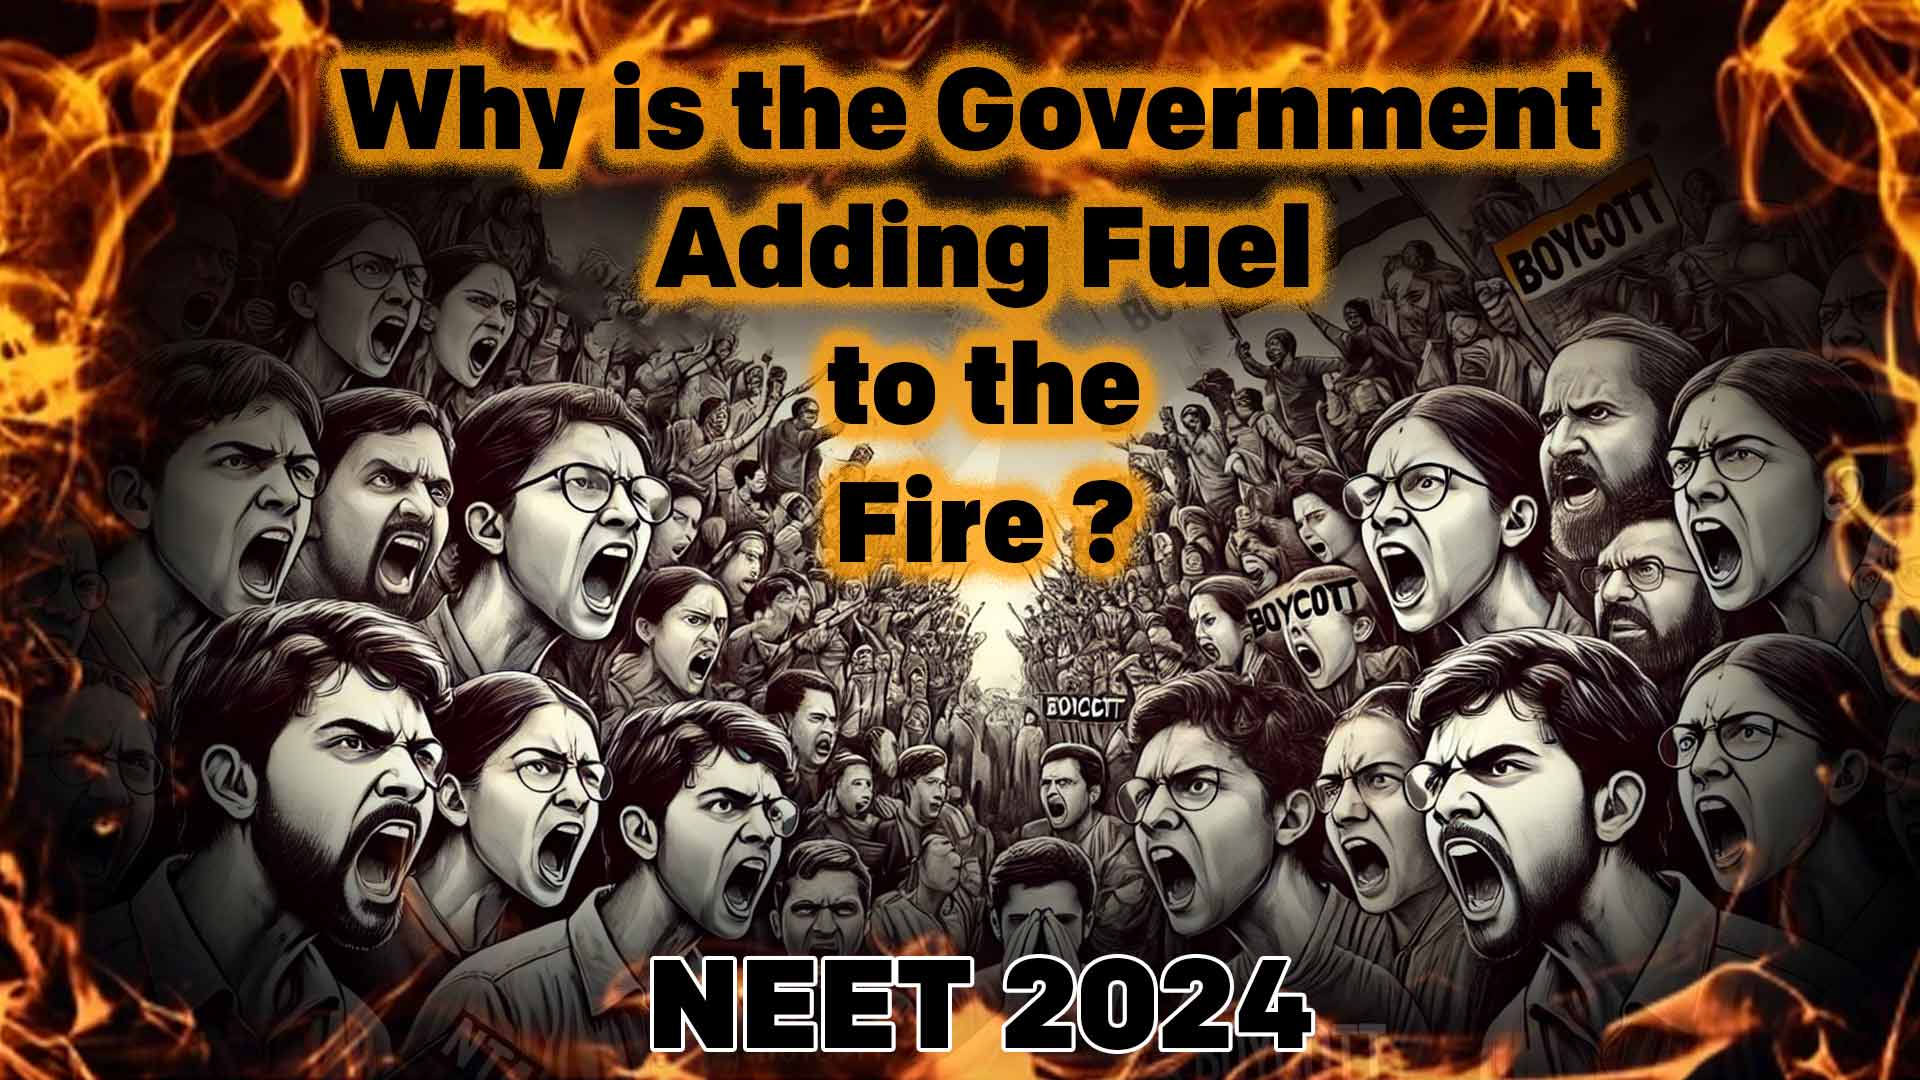 NEET 2024 Scandal: Why is the Government Adding Fuel to the Fire Instead of Taking Firm Action?